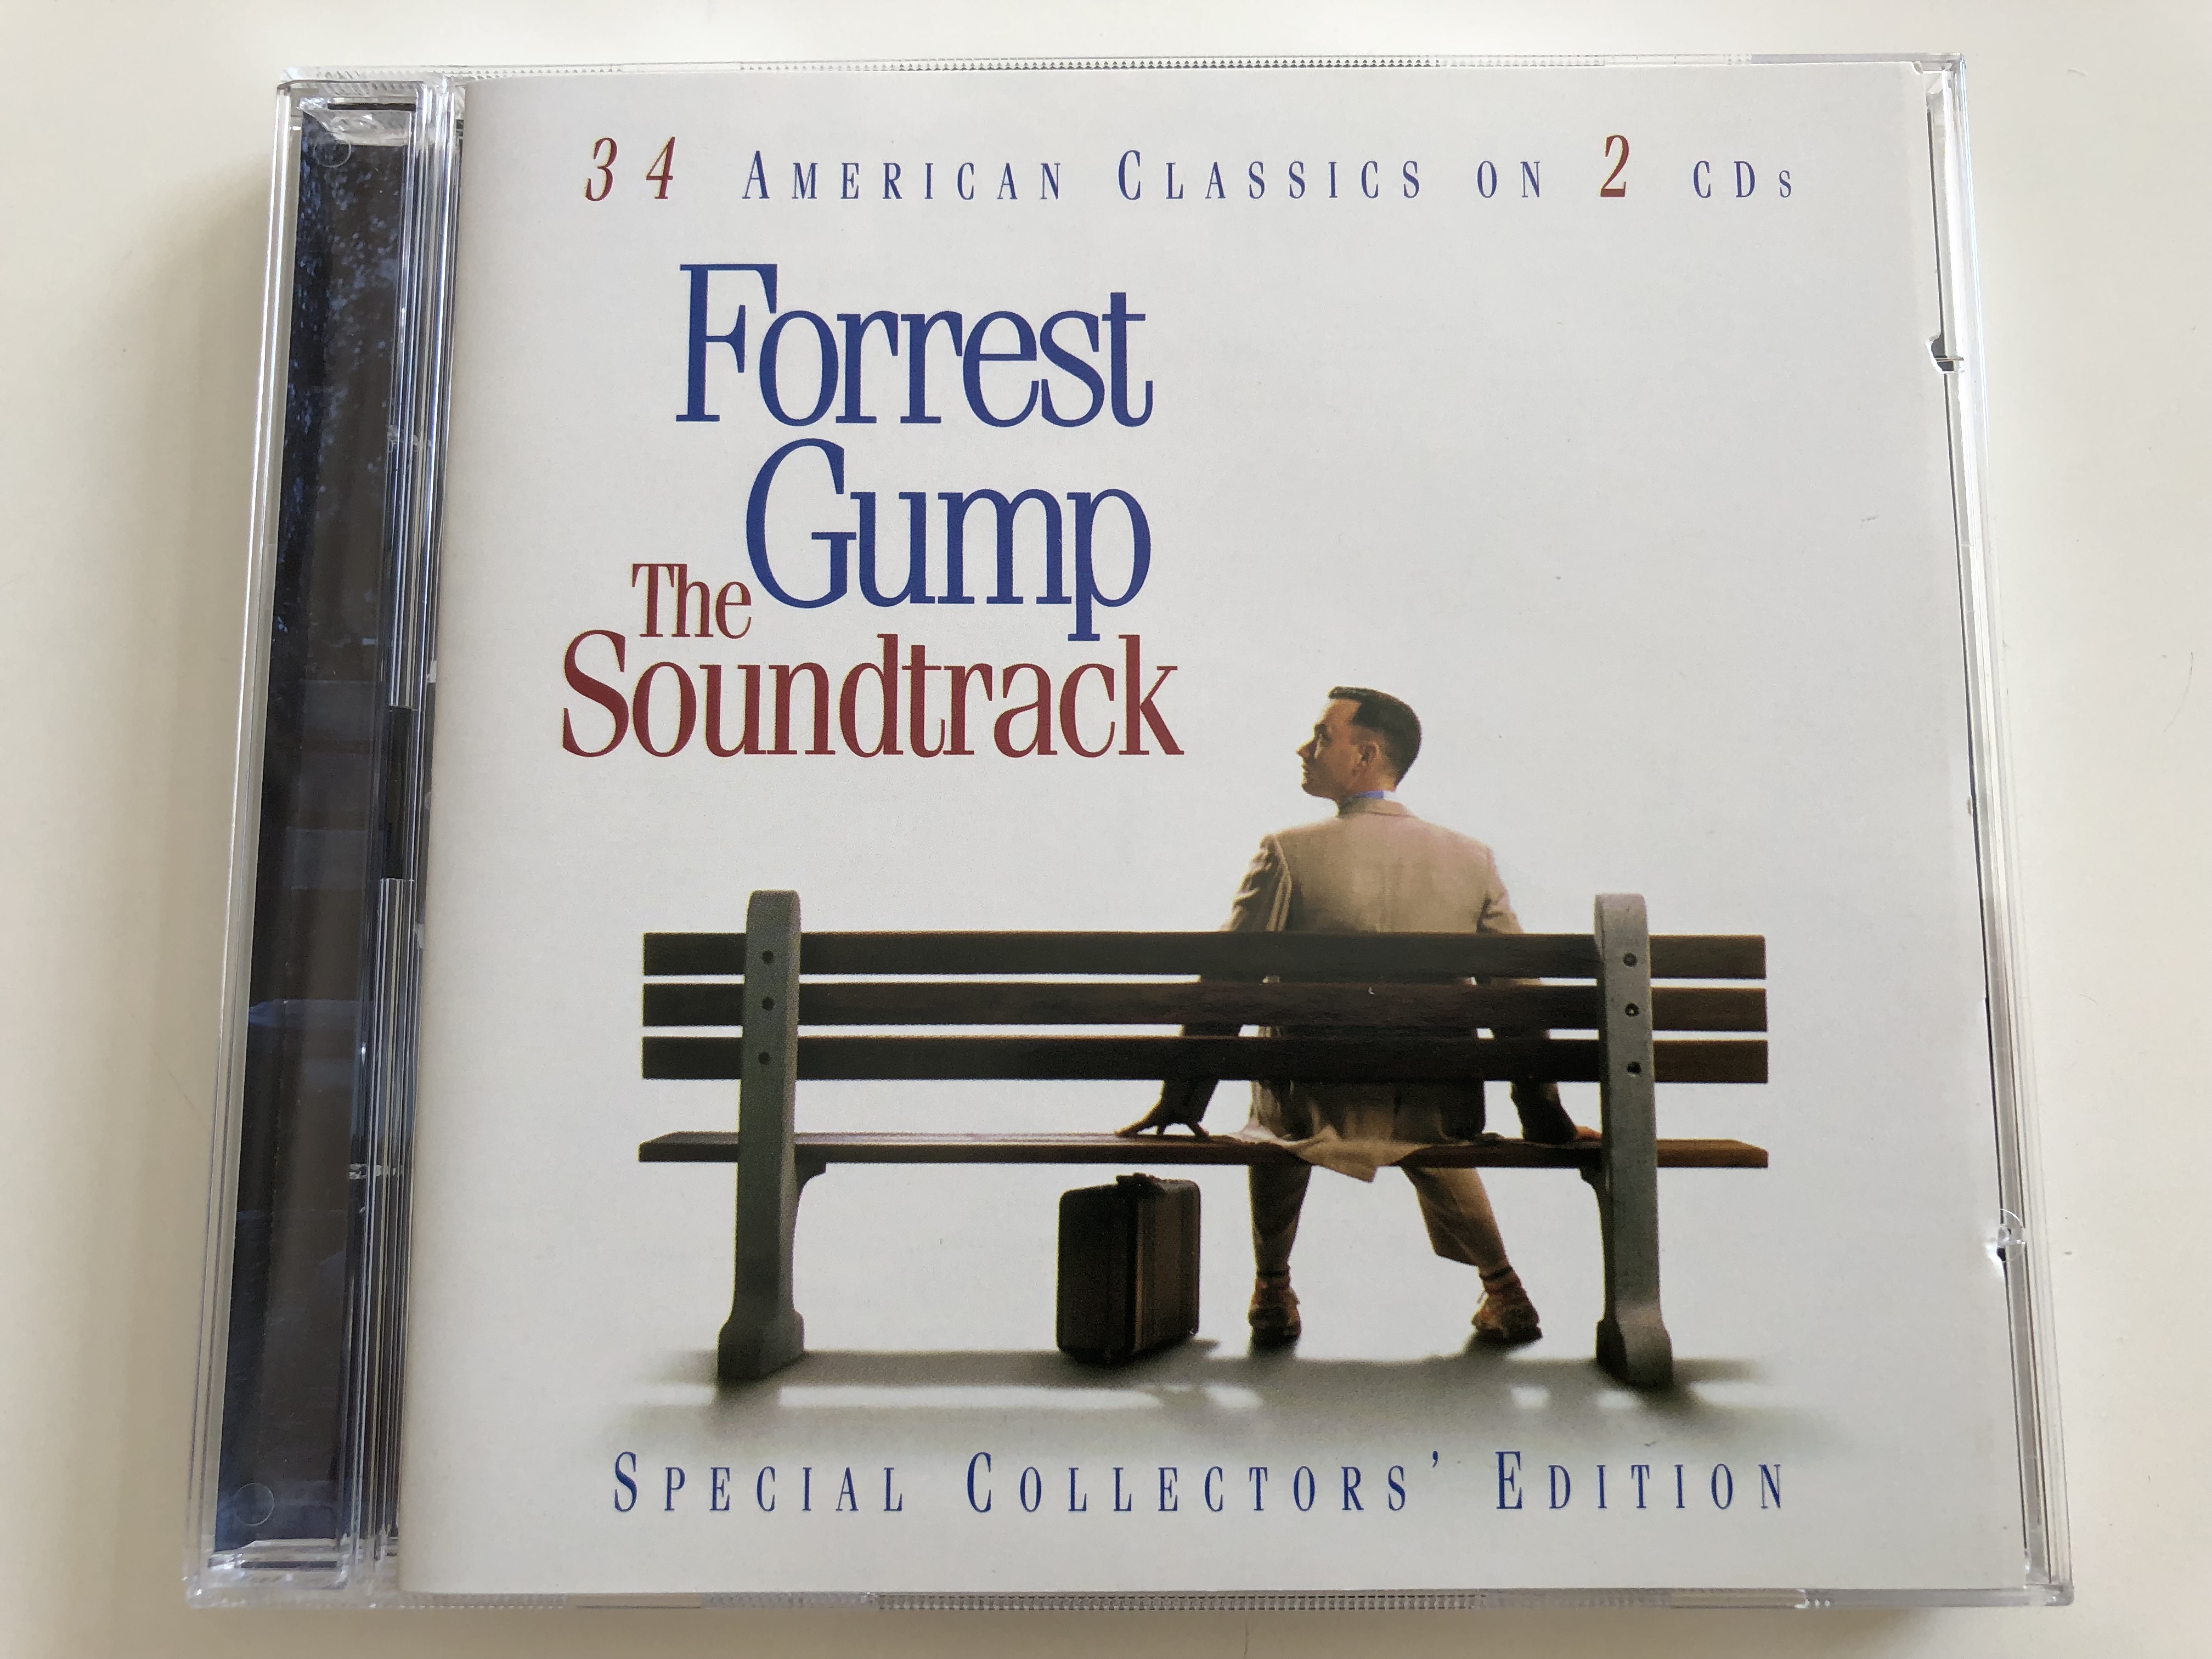 forrest-gump-the-soundtrack-34-american-classics-on-2-cds-special-collector-s-edition-epic-epc-5044942-audio-cd-set-1994-1-.jpg